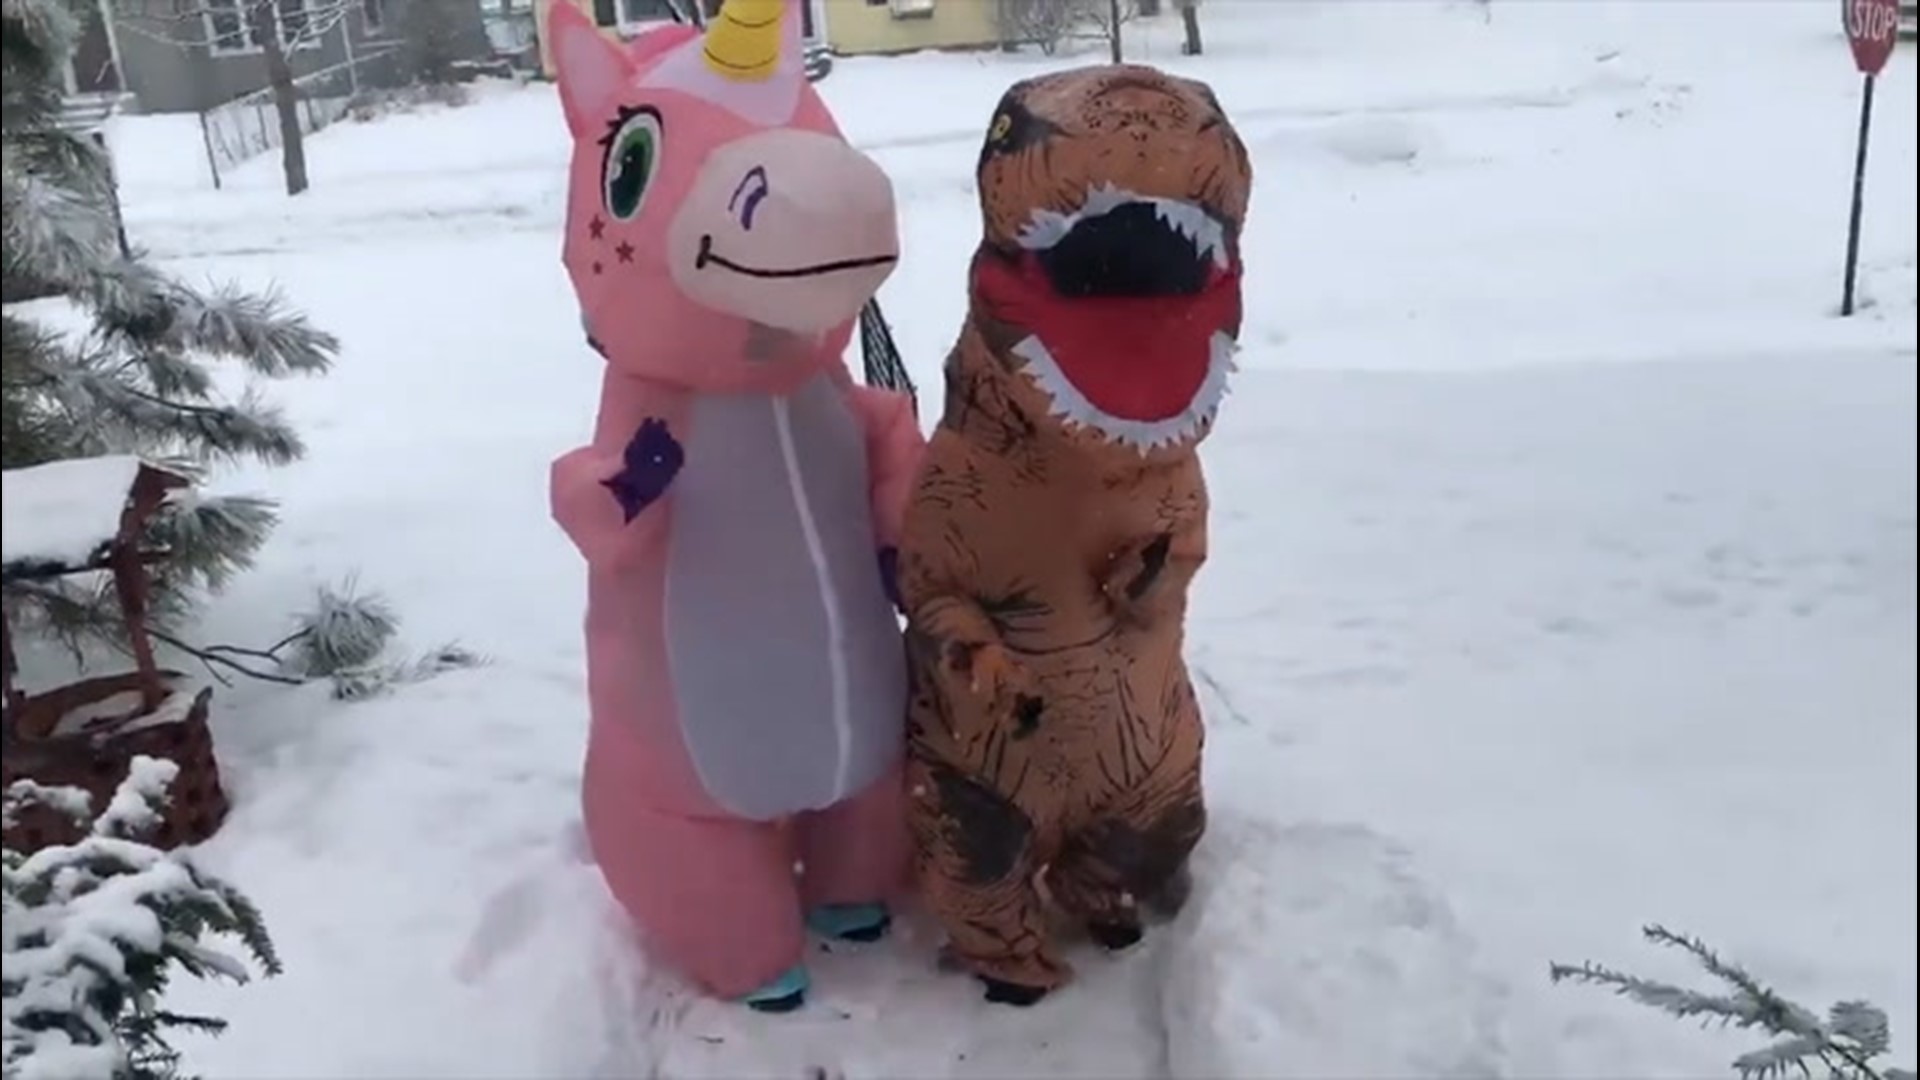 People dressed in a dinosaur and a unicorn costume greeted children passing by in the snowy streets during a snowstorm in the Twin Cities region of Minnesota, on Jan. 14.